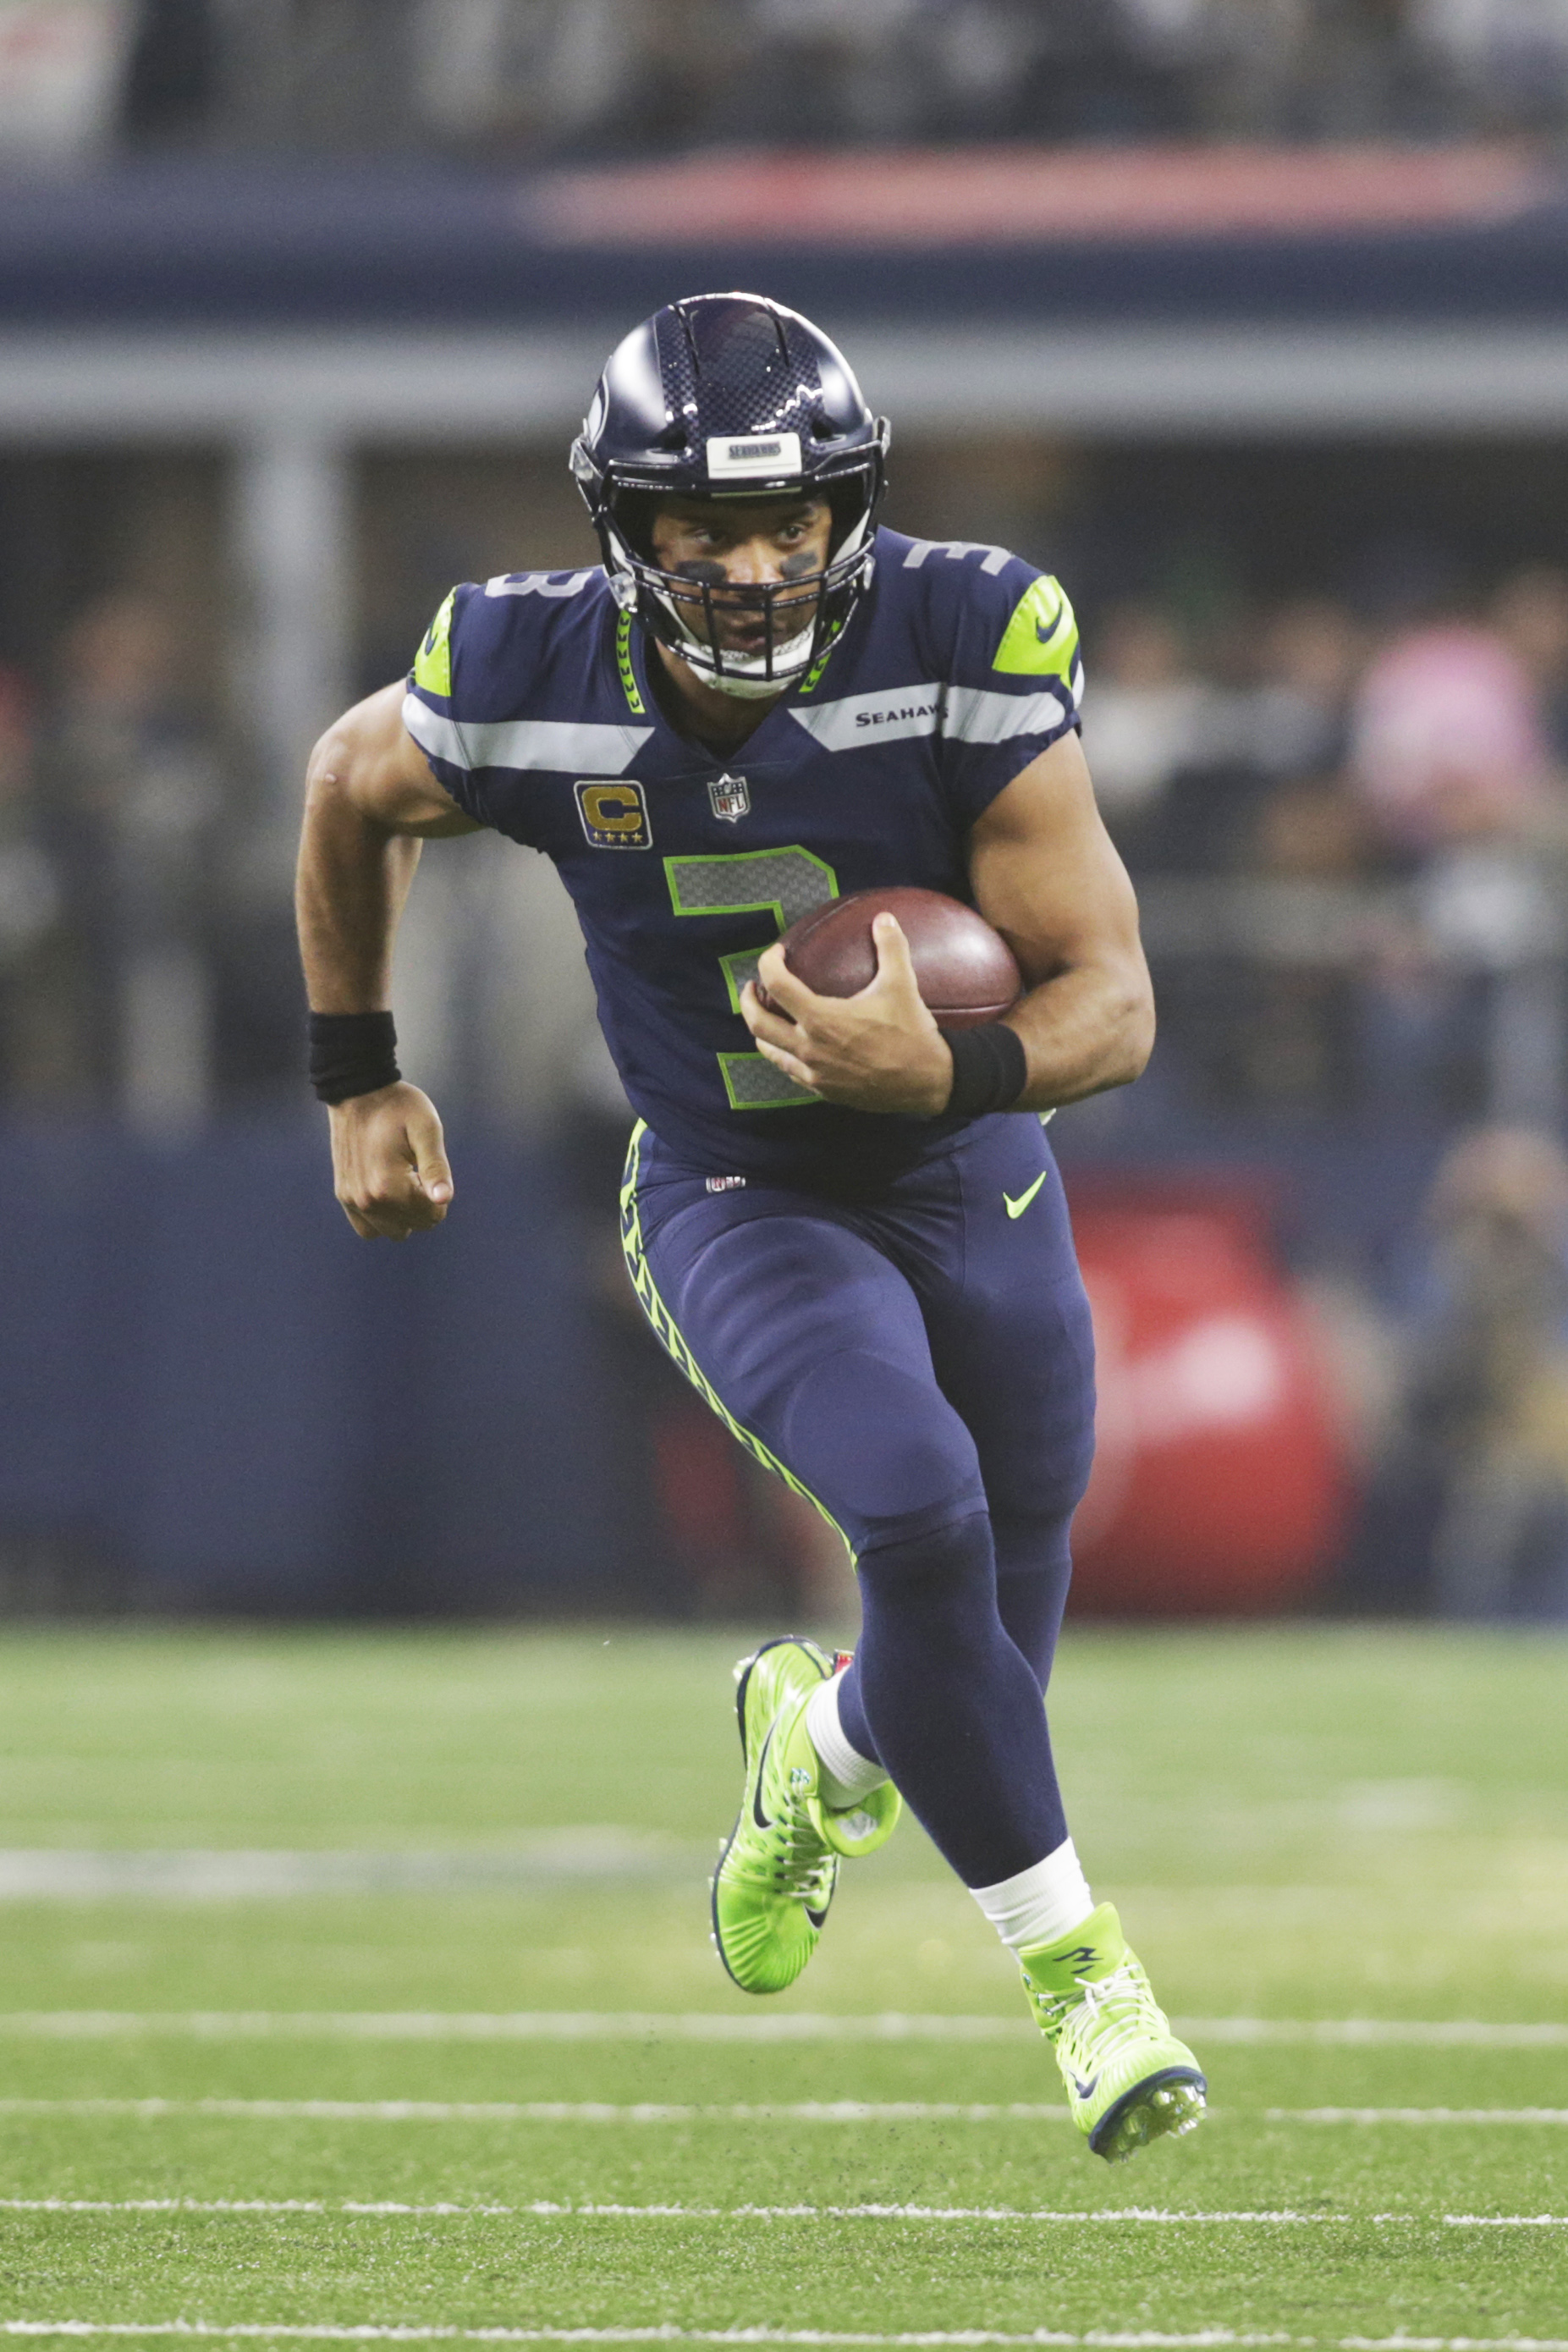 Seahawks' Russell Wilson Reports To OTAs